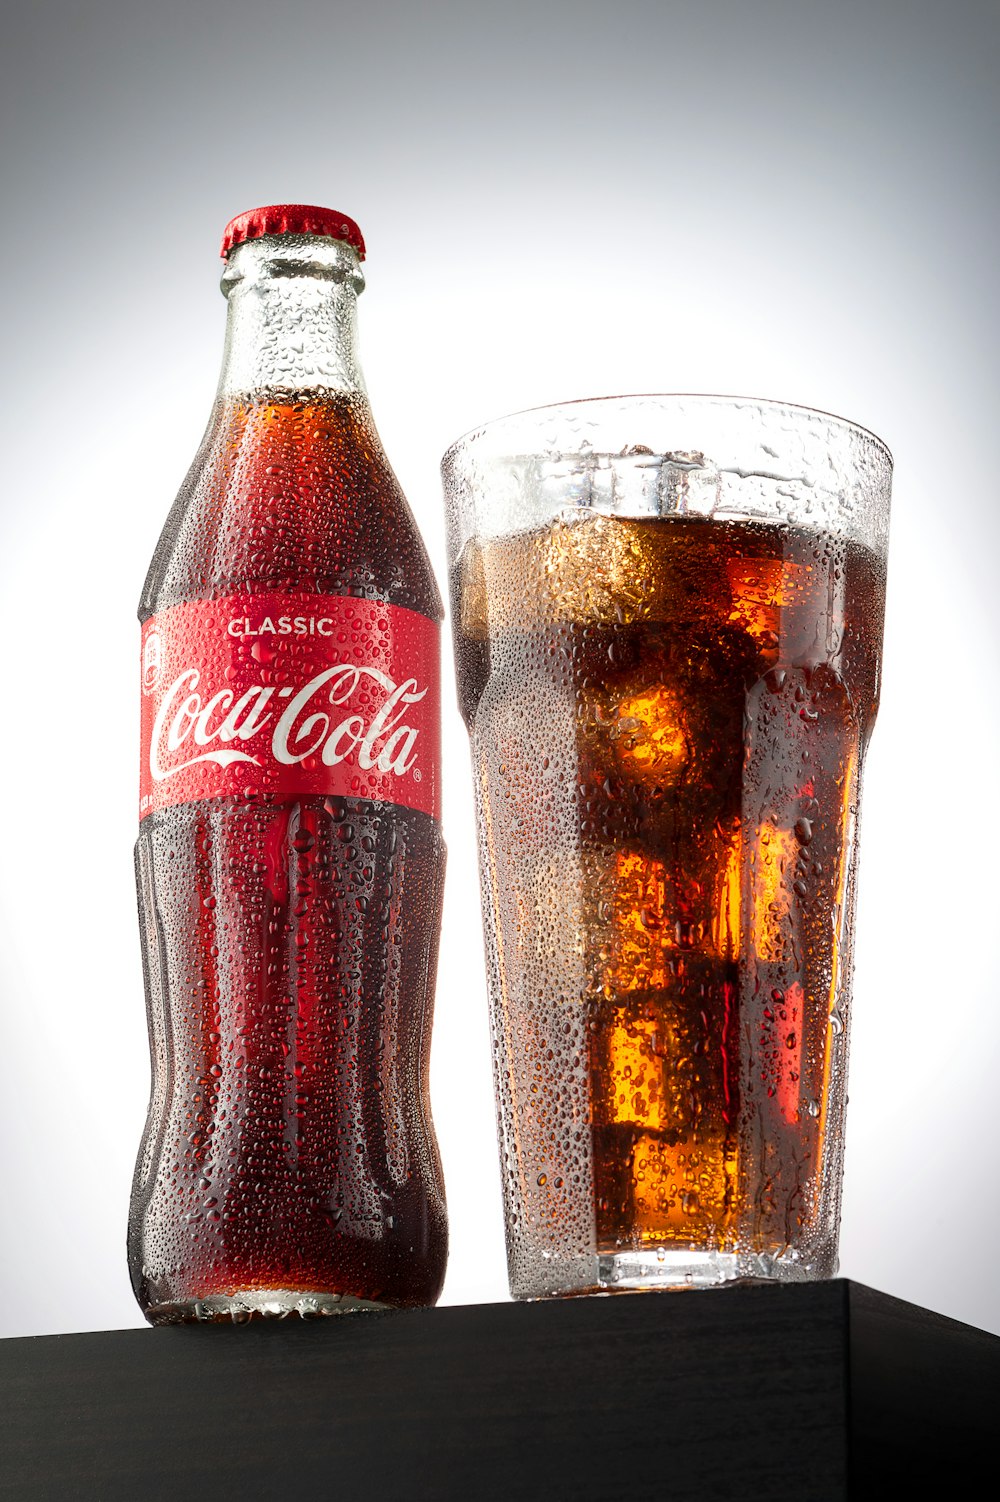 6+ Hundred Coke Glass Top View Royalty-Free Images, Stock Photos & Pictures